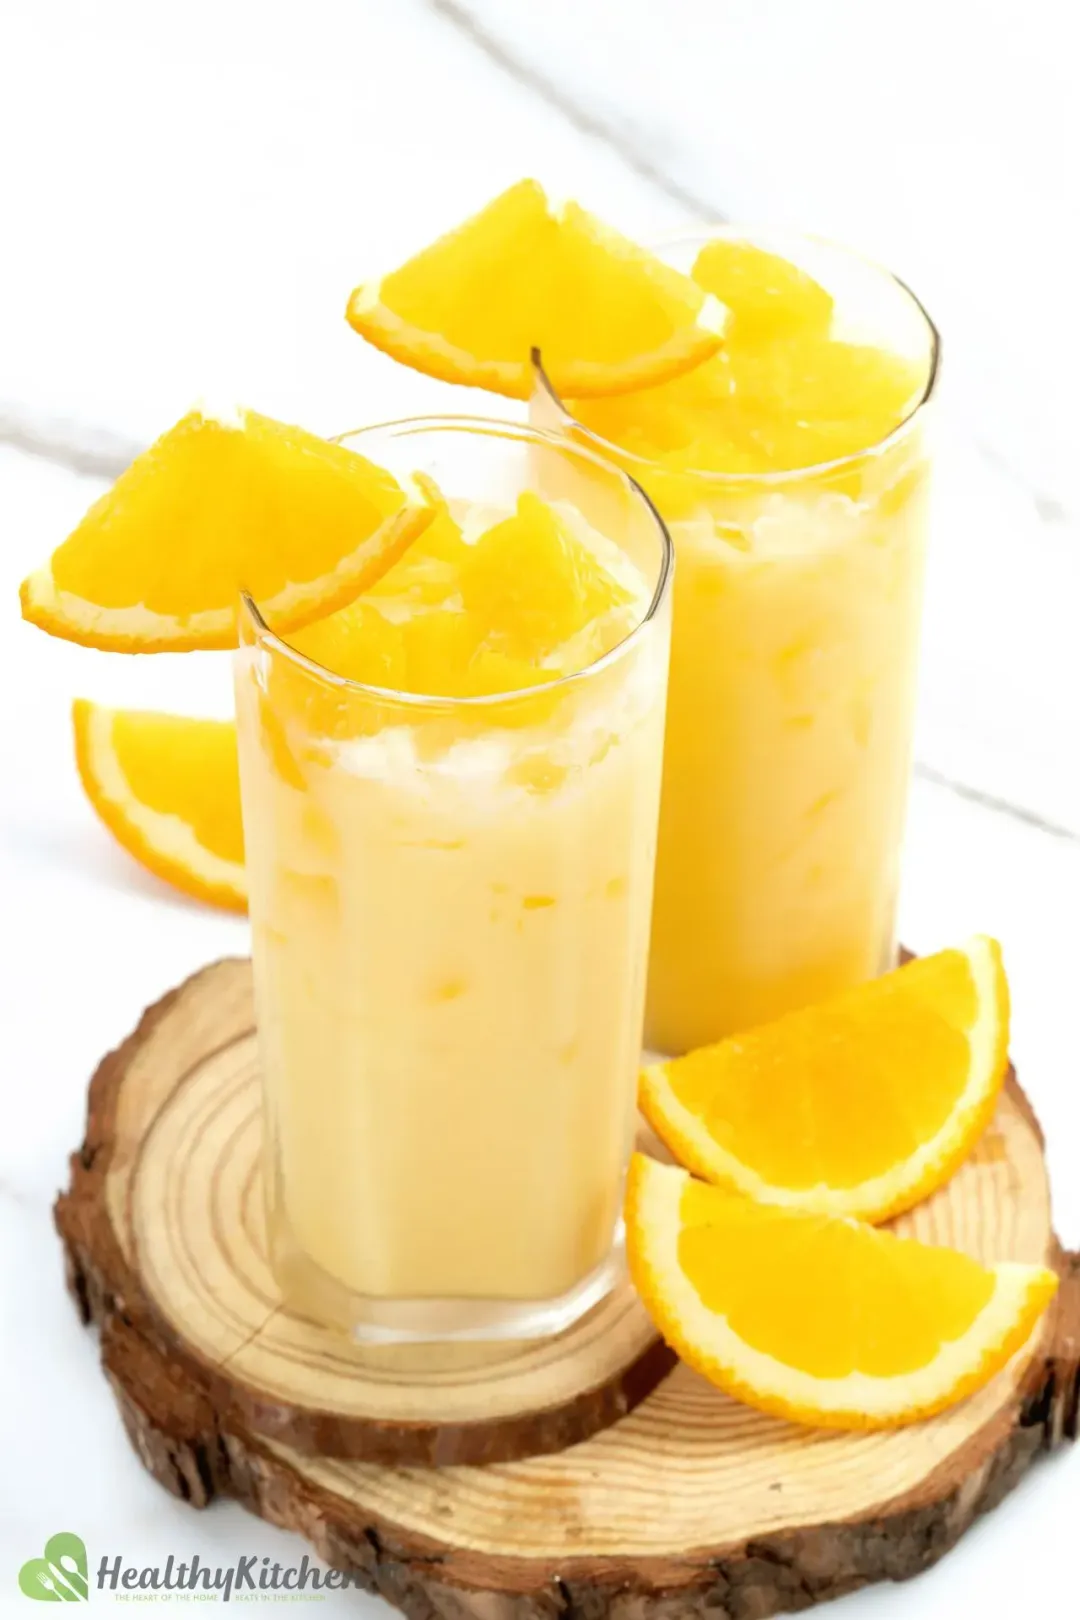 Two tall glasses of milk and orange drink, full of cubed oranges and orange wedges as garnish